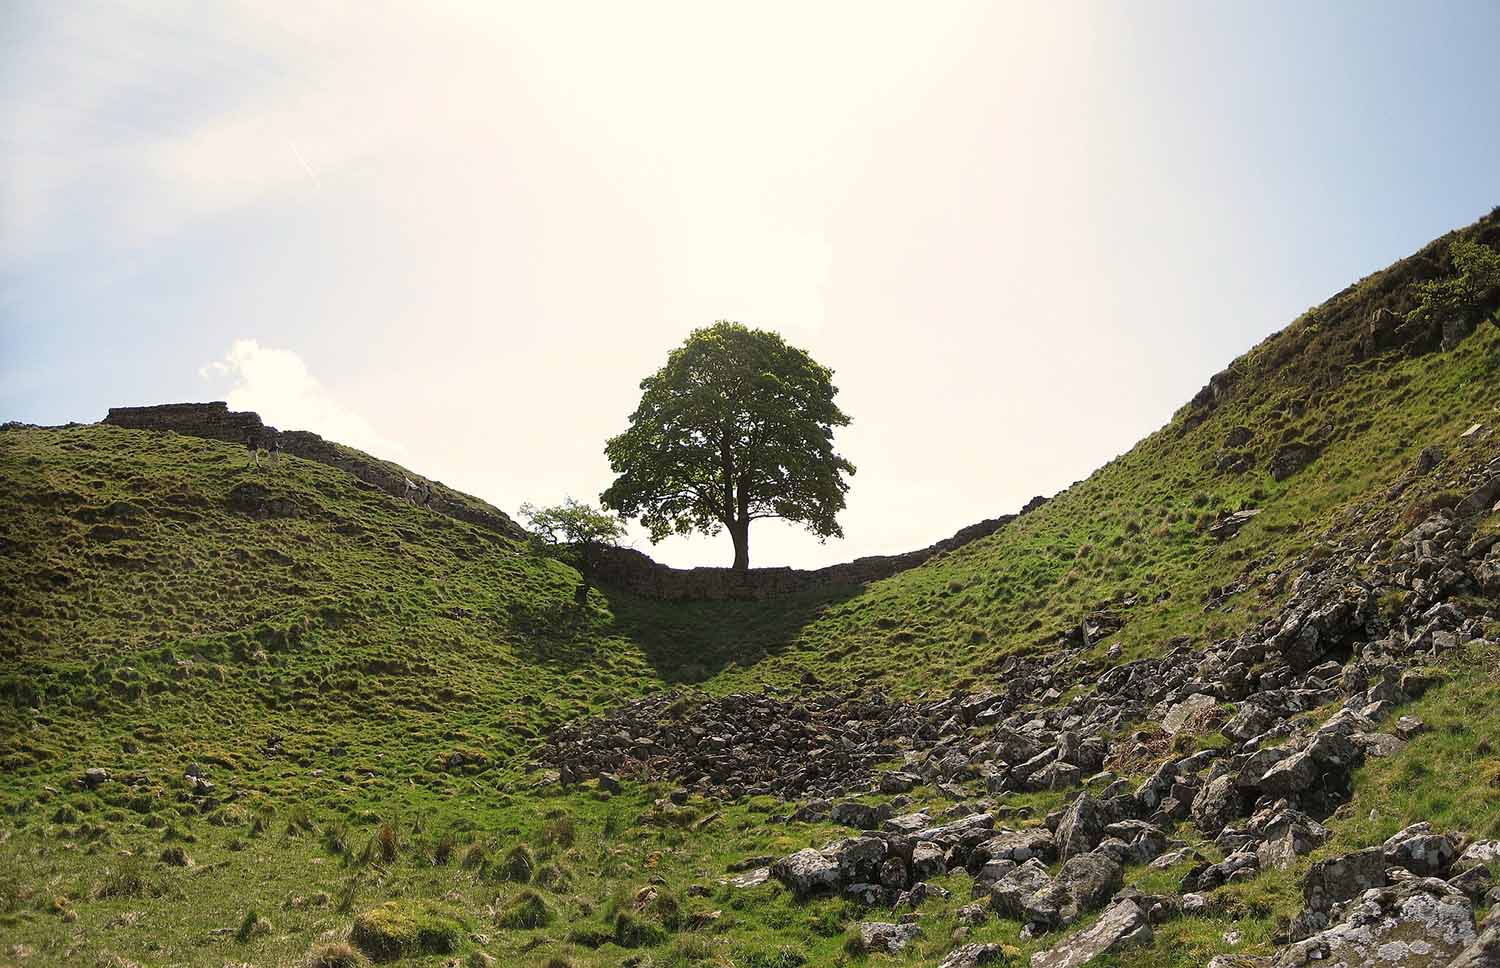 Tree at Sycamore Gap on Hadrian's Wall by Johnnie Shannon, CC BY 2.0, via Wikimedia Commons